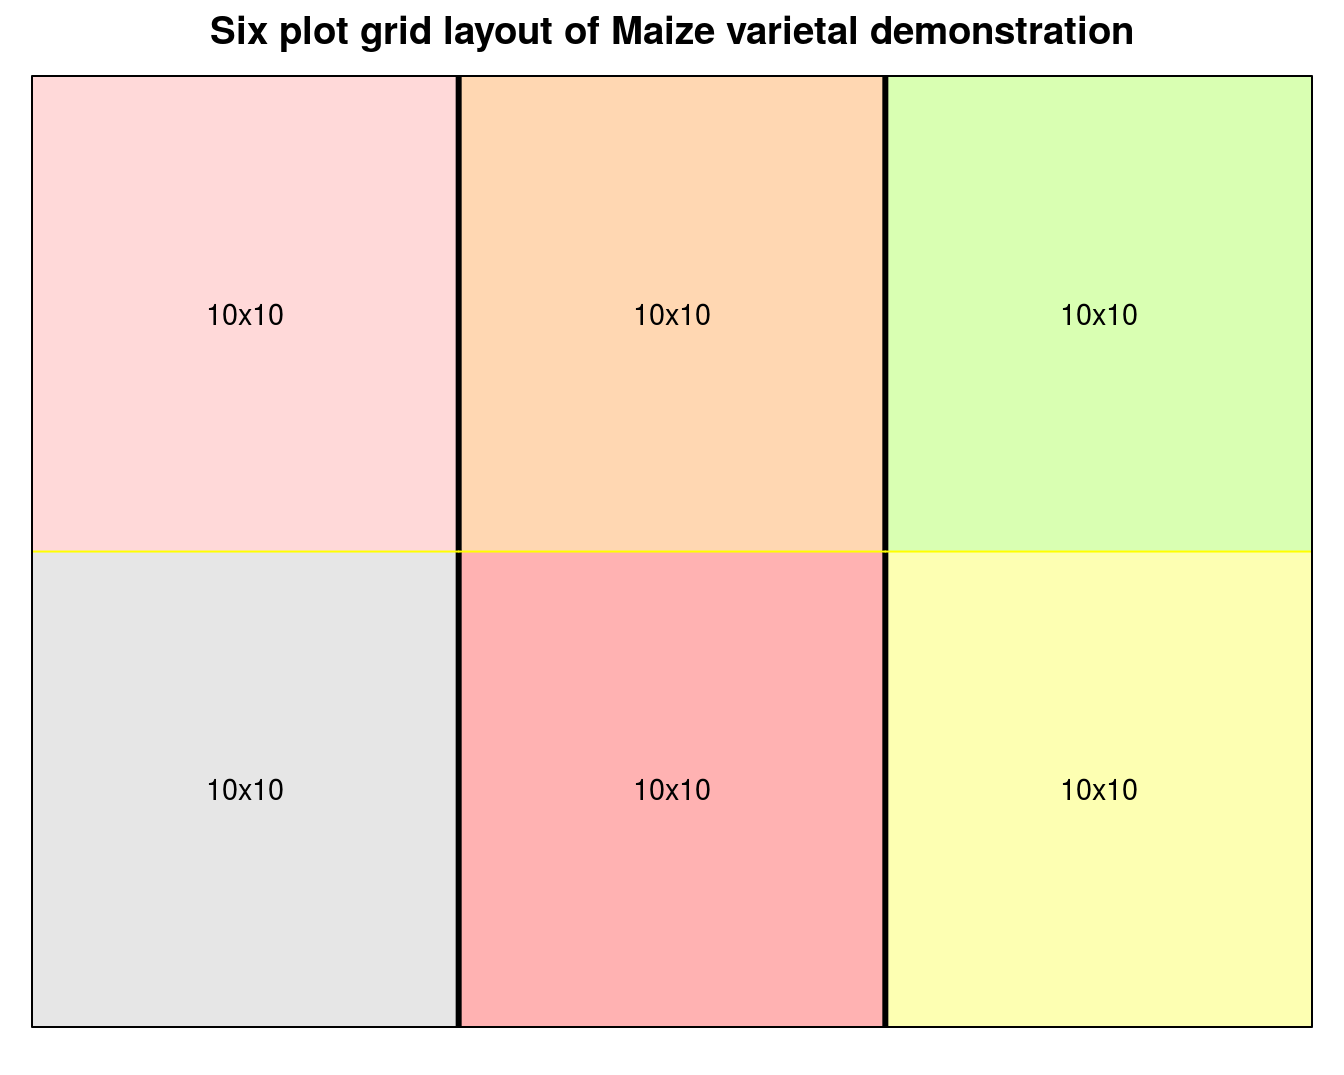 Grid layout design of varietal demonstration for small number of plots